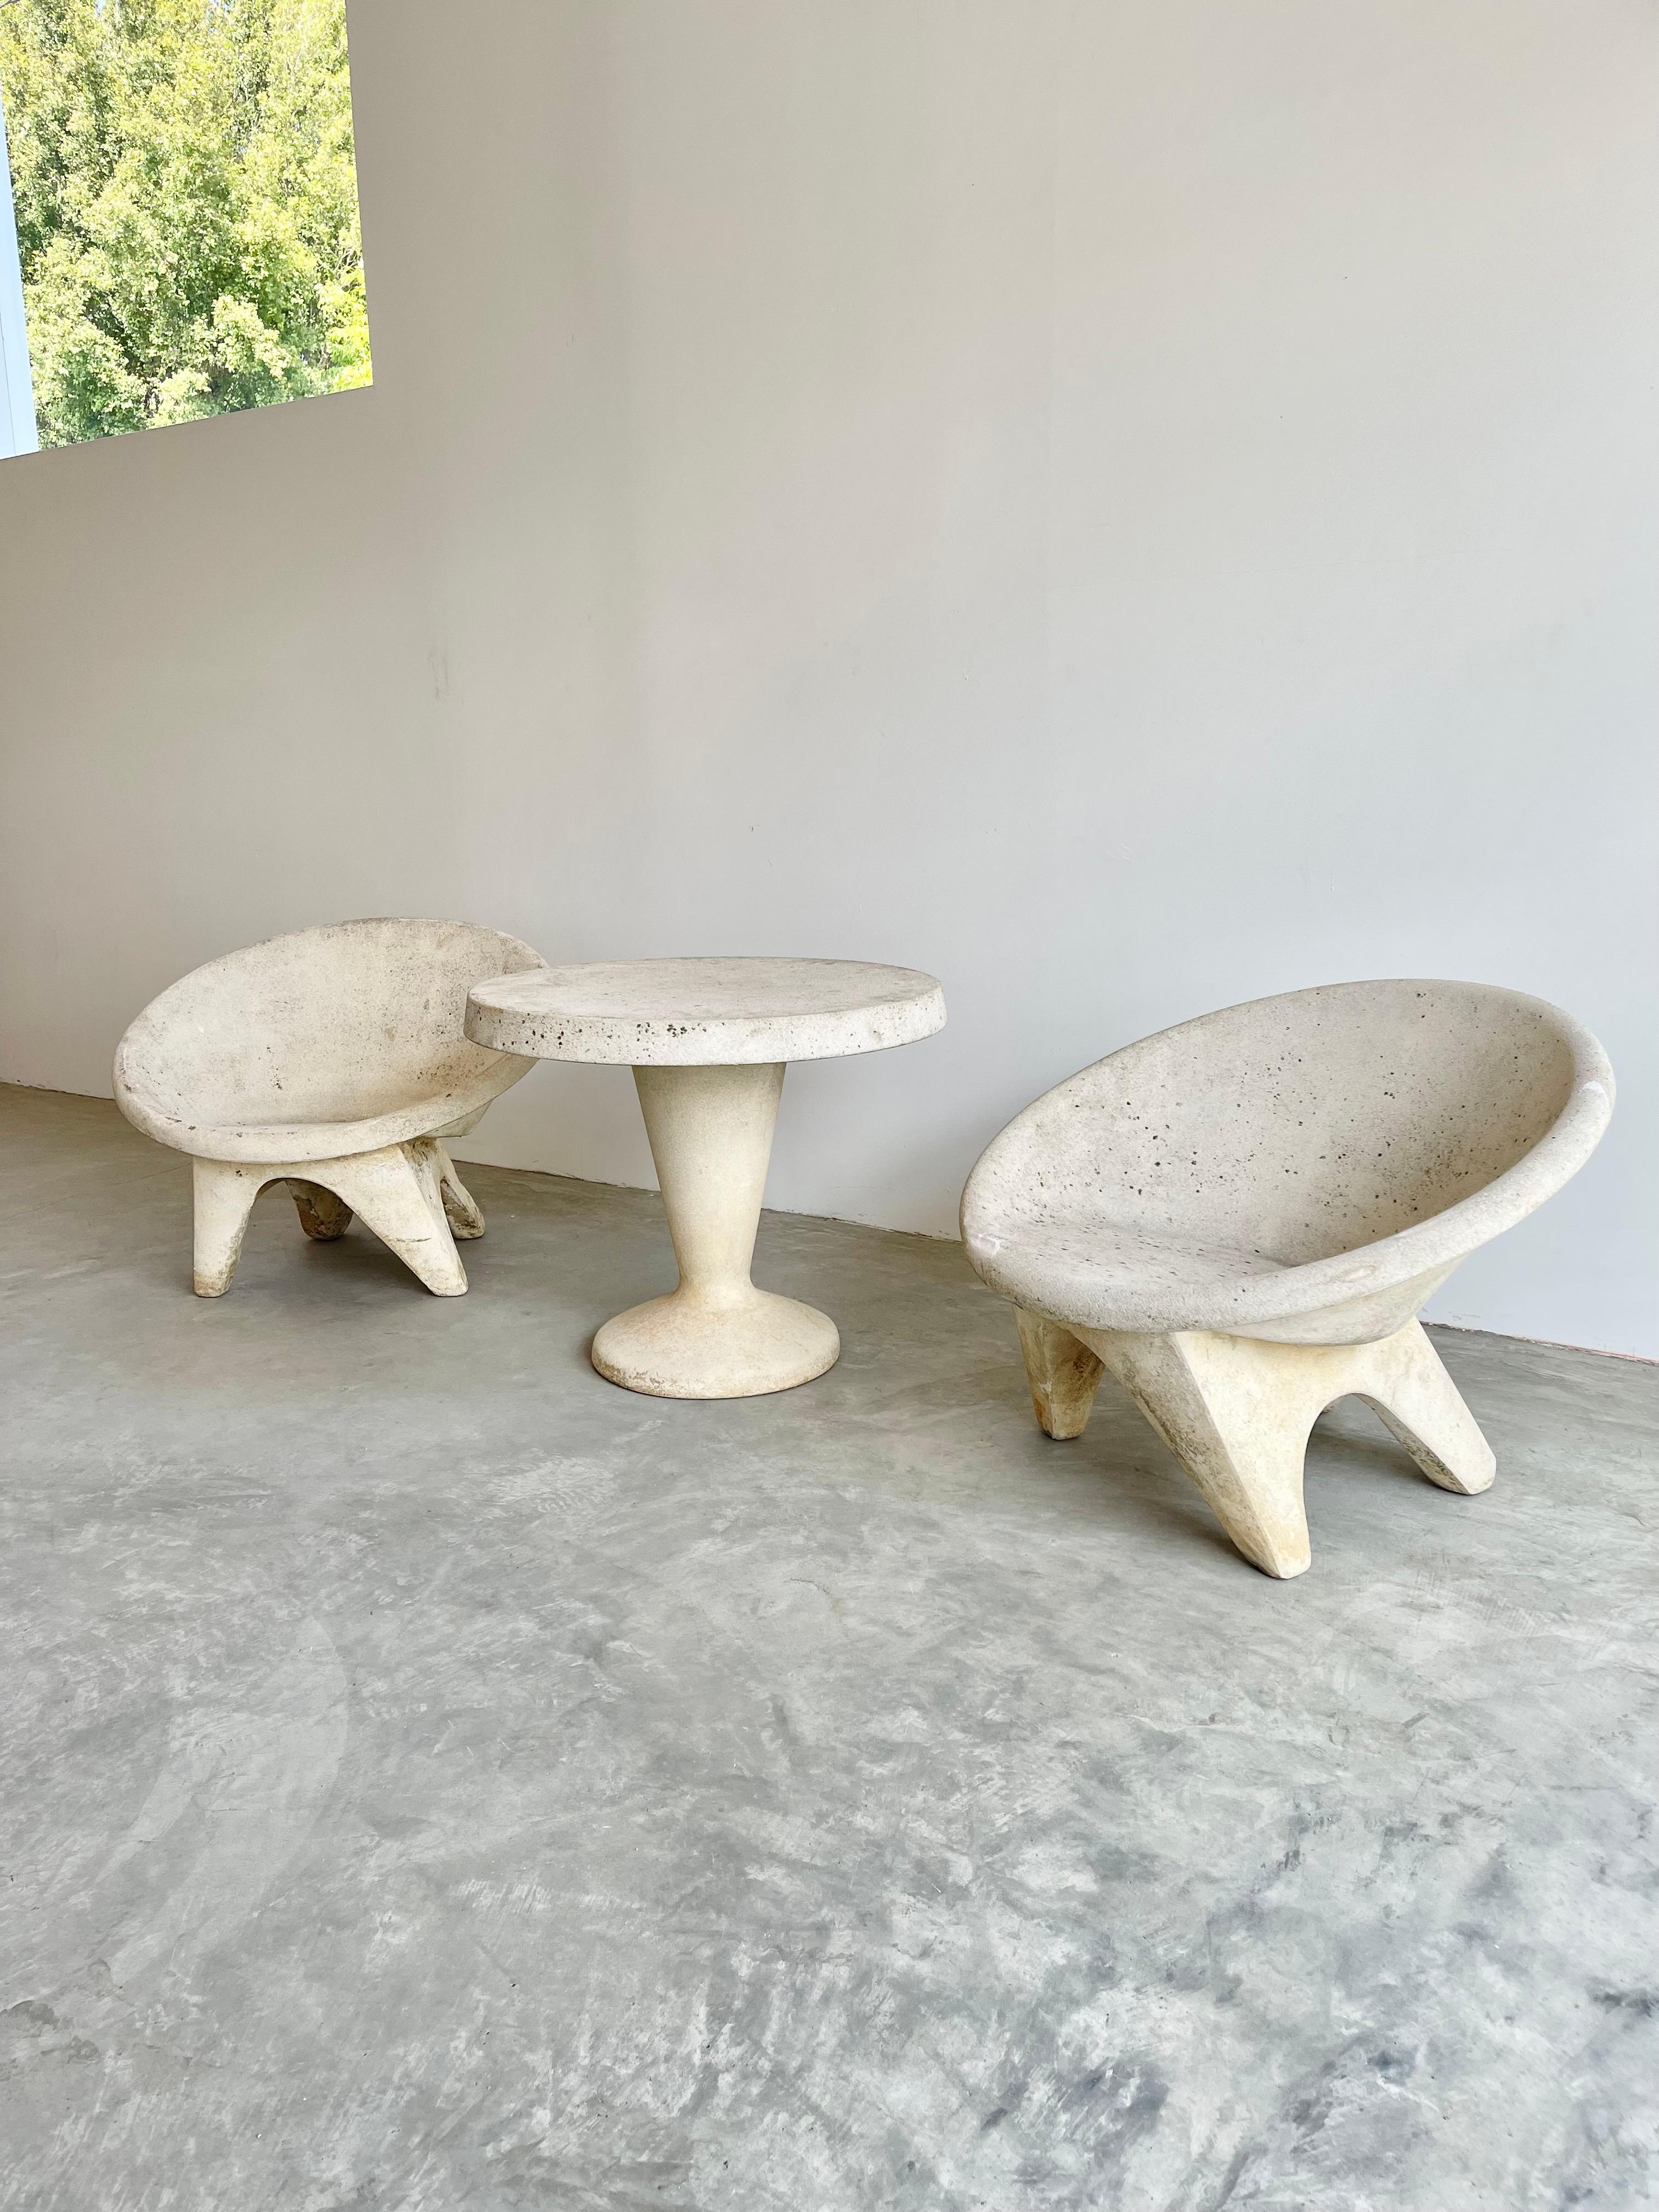 Modern Sculptural Concrete Chairs and Table, 1960s Switzerland